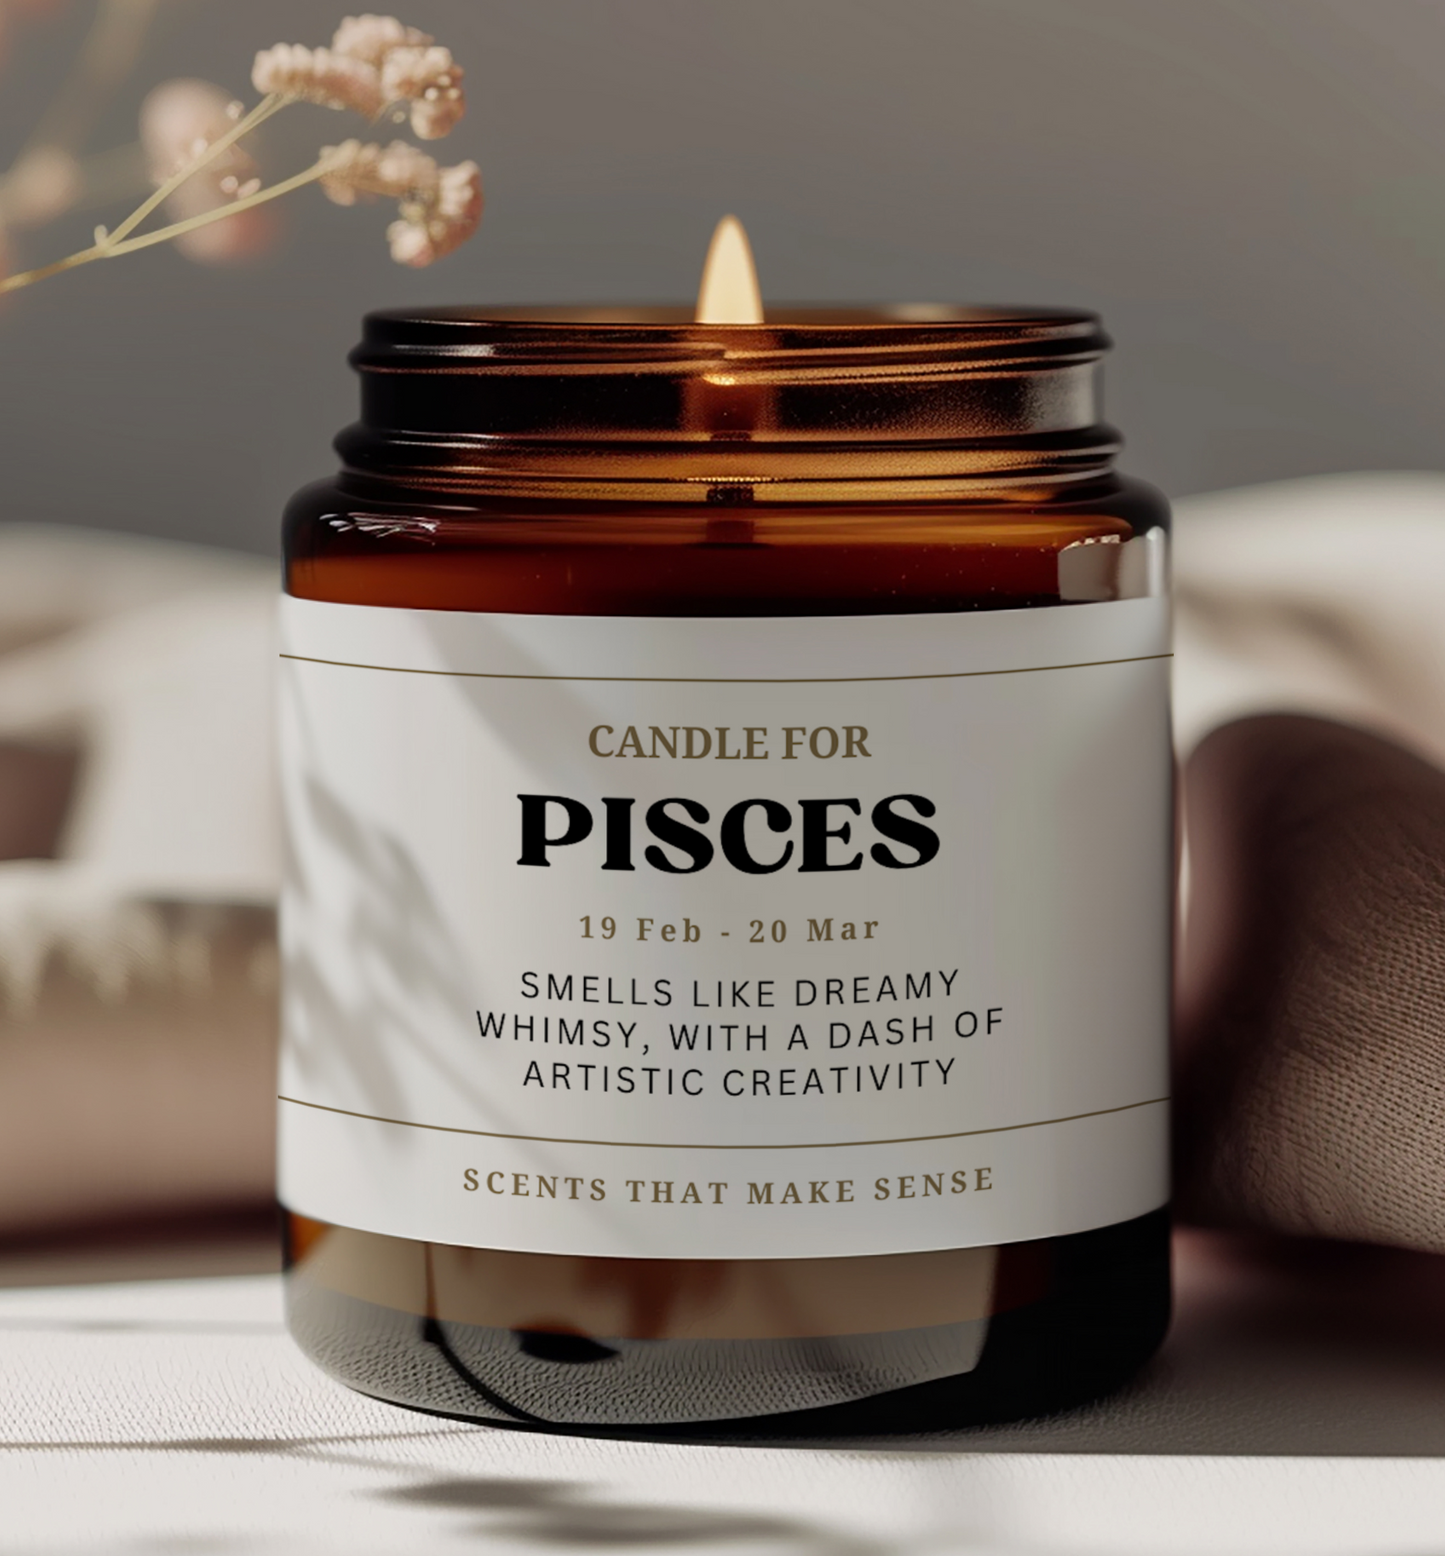 pisces birthday gift zodiac gift funny candle the label reads candle for pisces smells like dreamy whimsy with a dash of artistic creativity